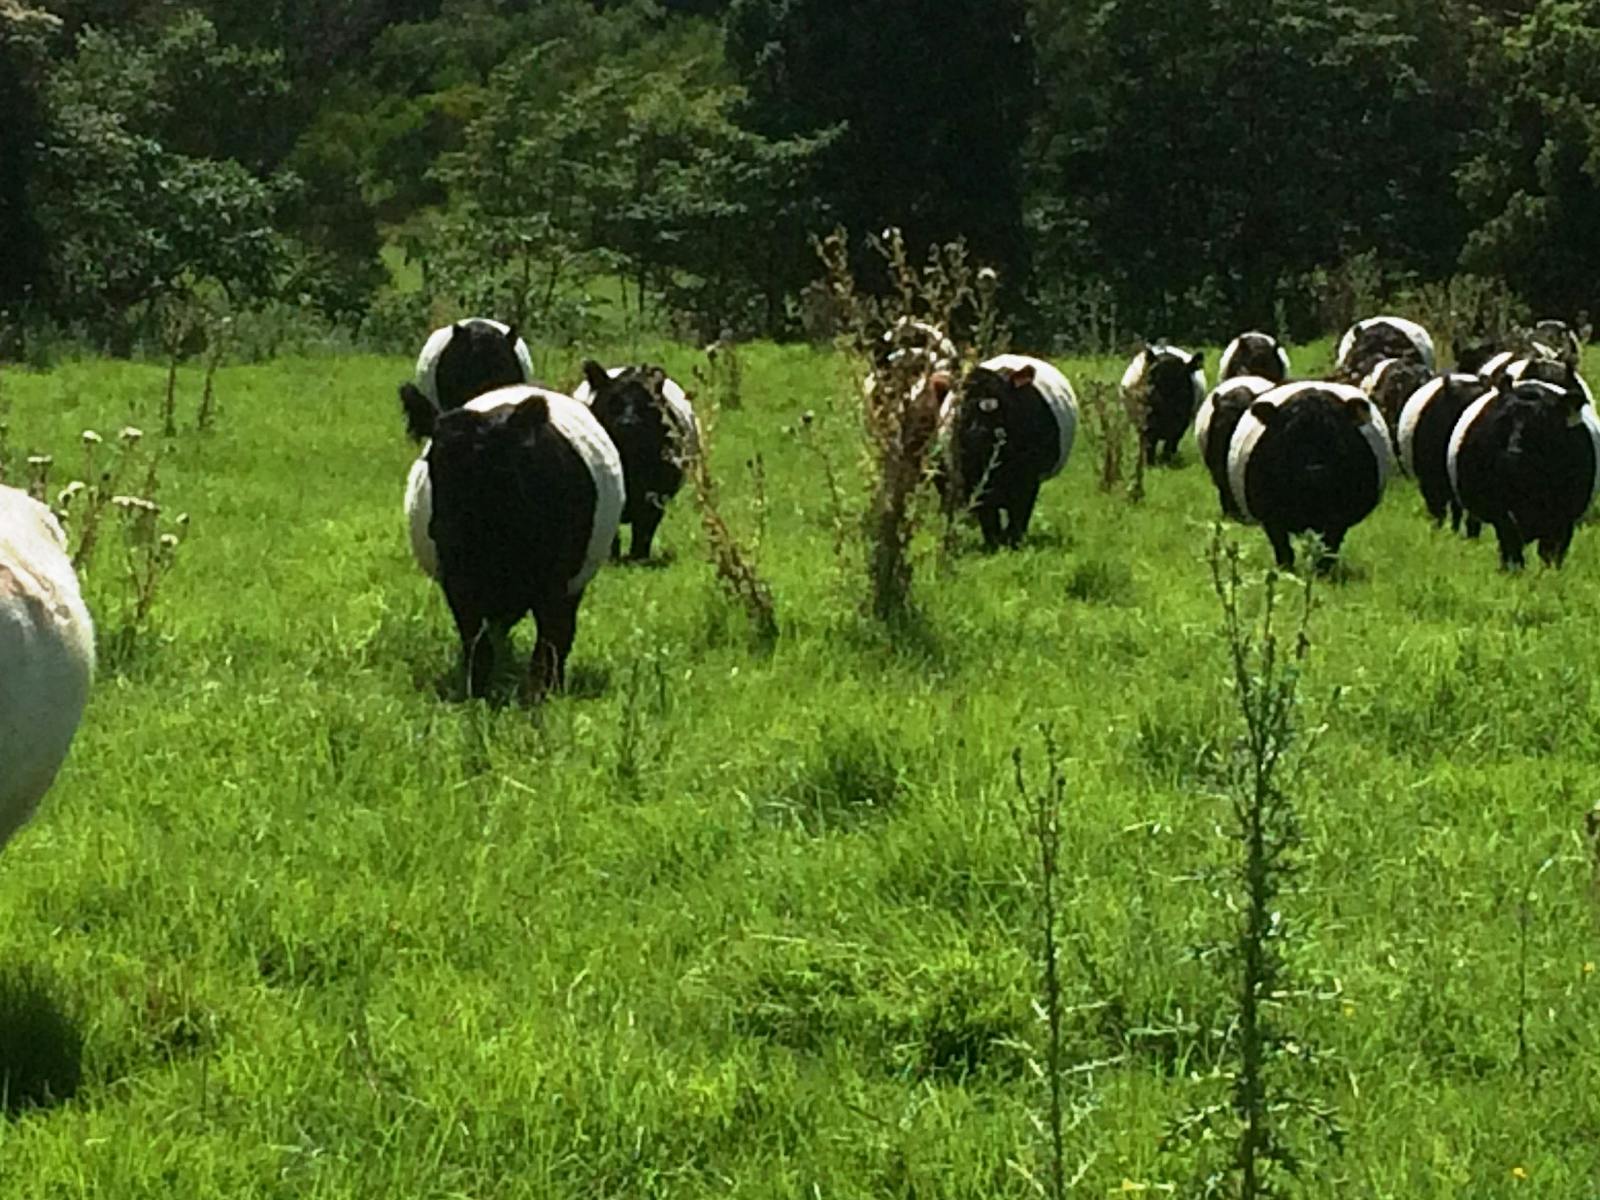 Our Belted Galloway in the paddock